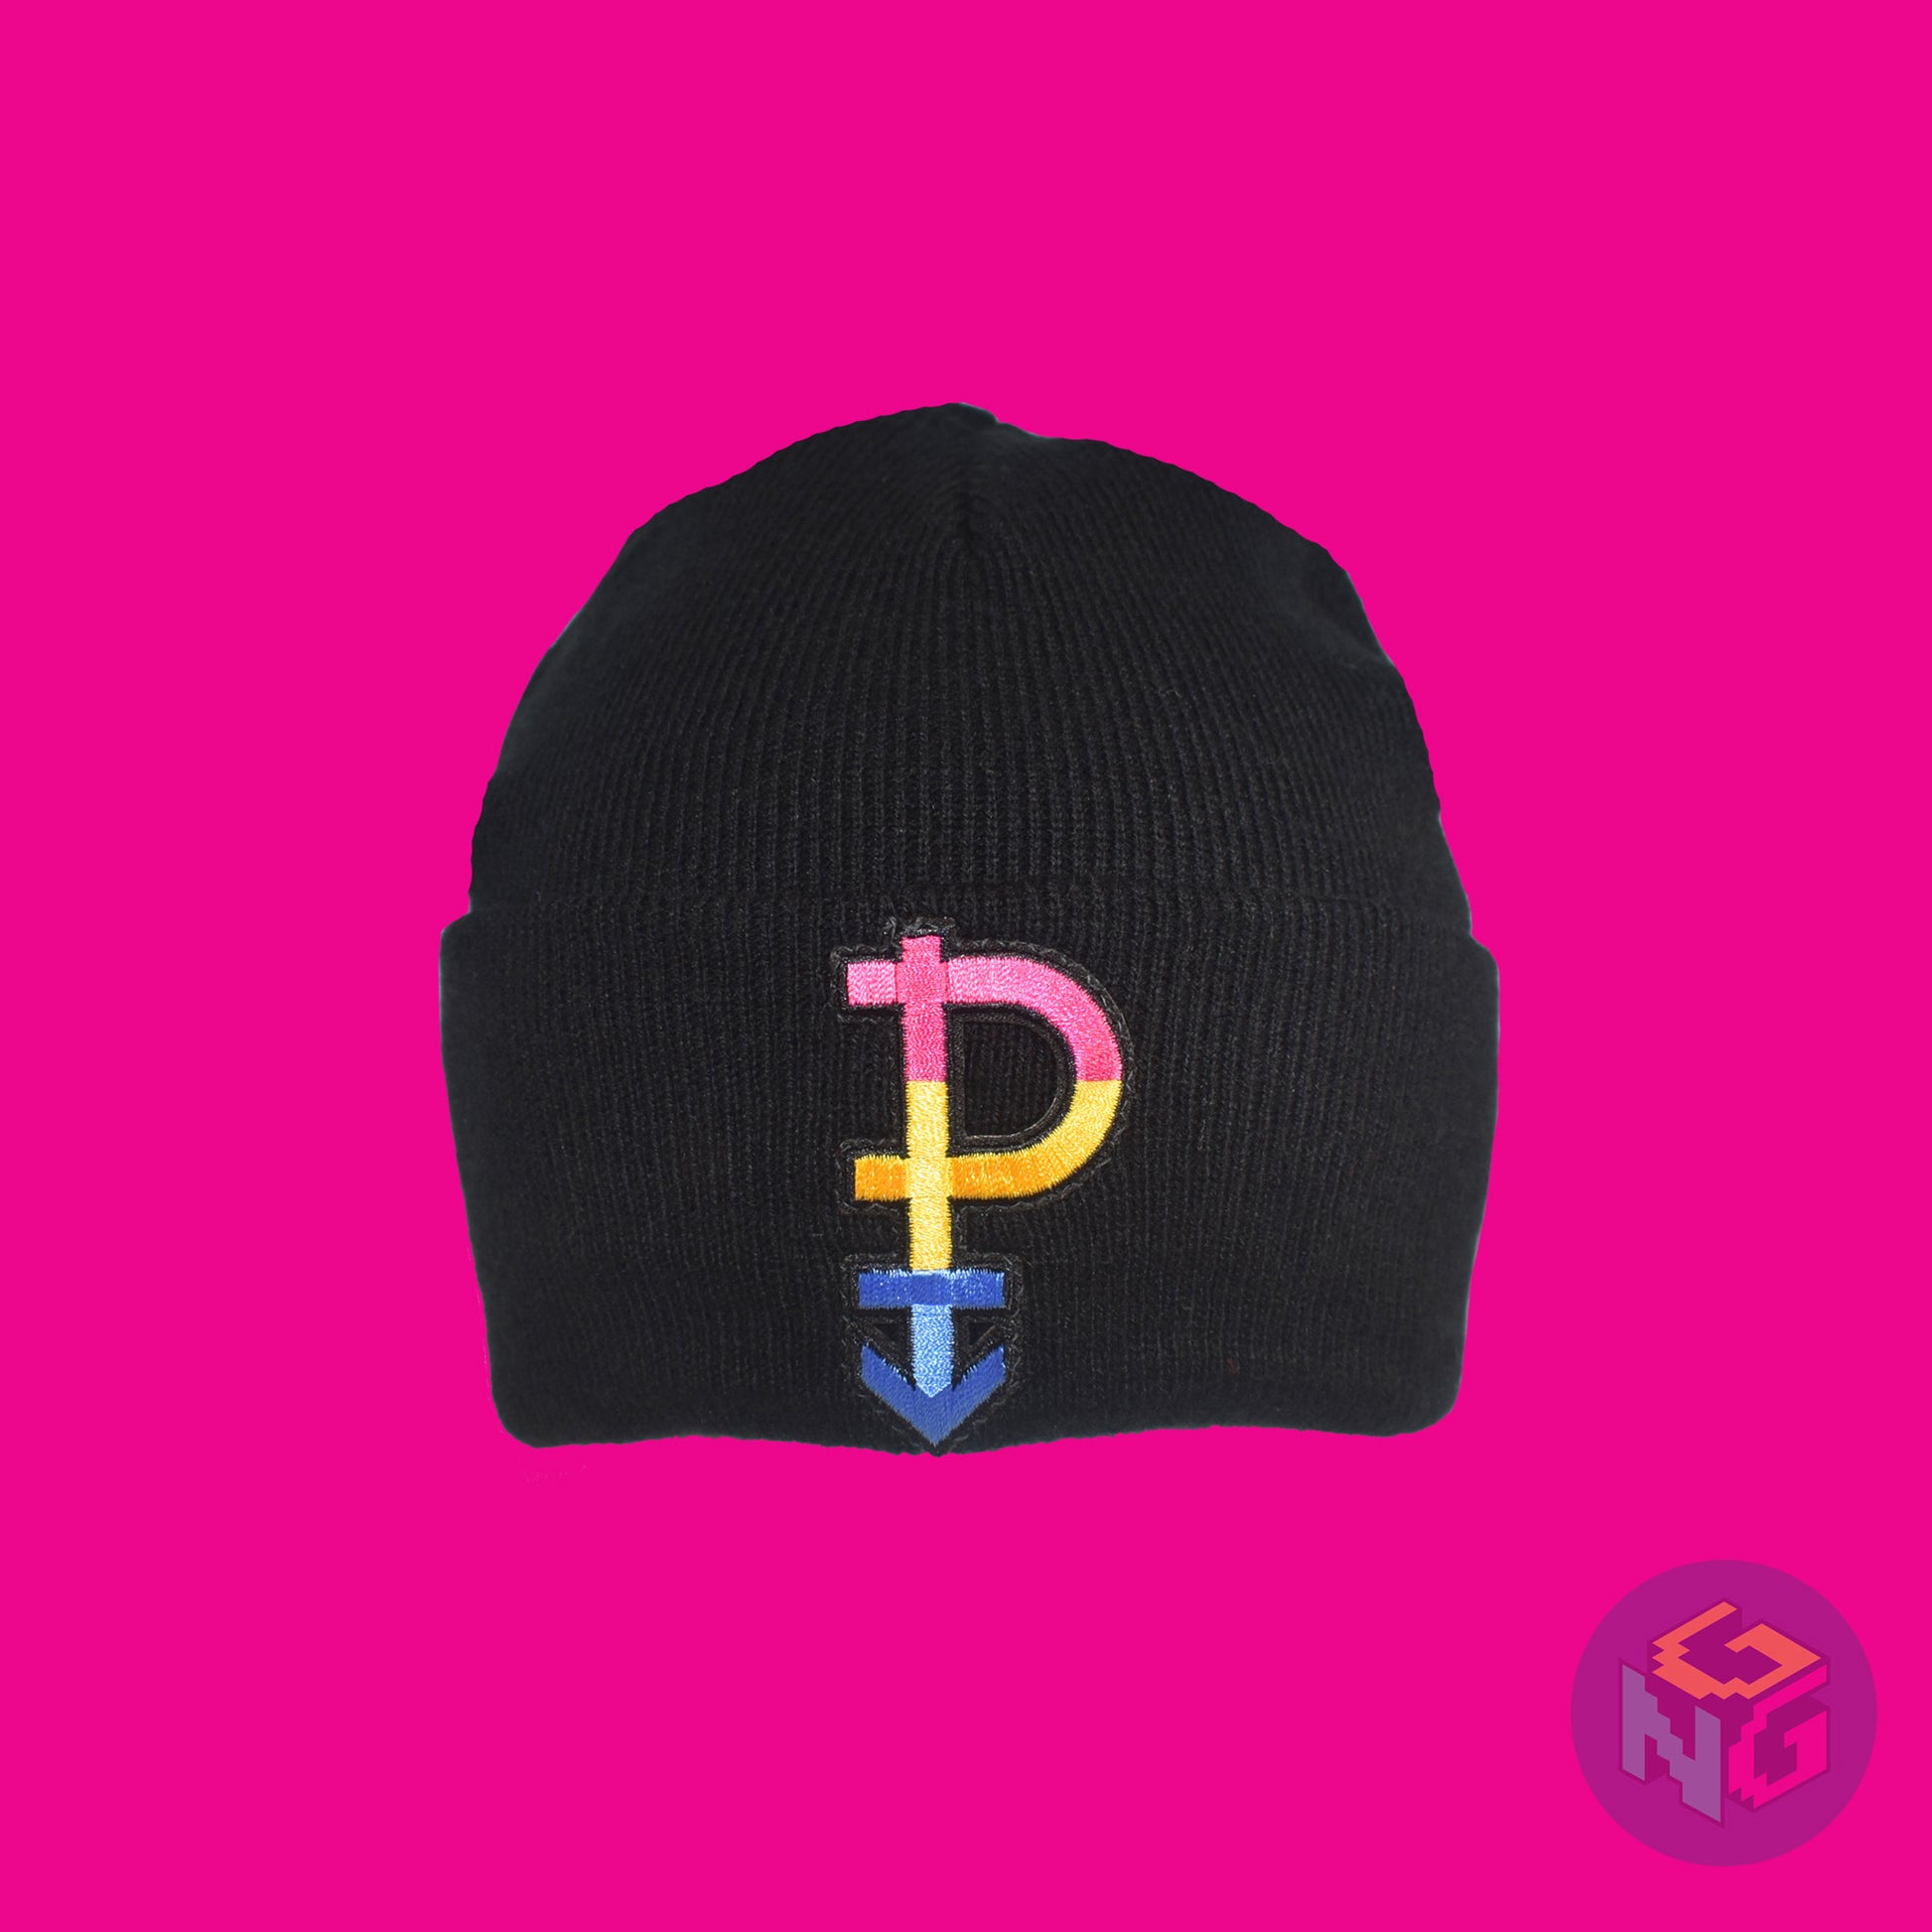 Black knit fabric beanie with the pansexual symbol in pink, yellow, and blue on the front. It is stretched and in front view on a pink background